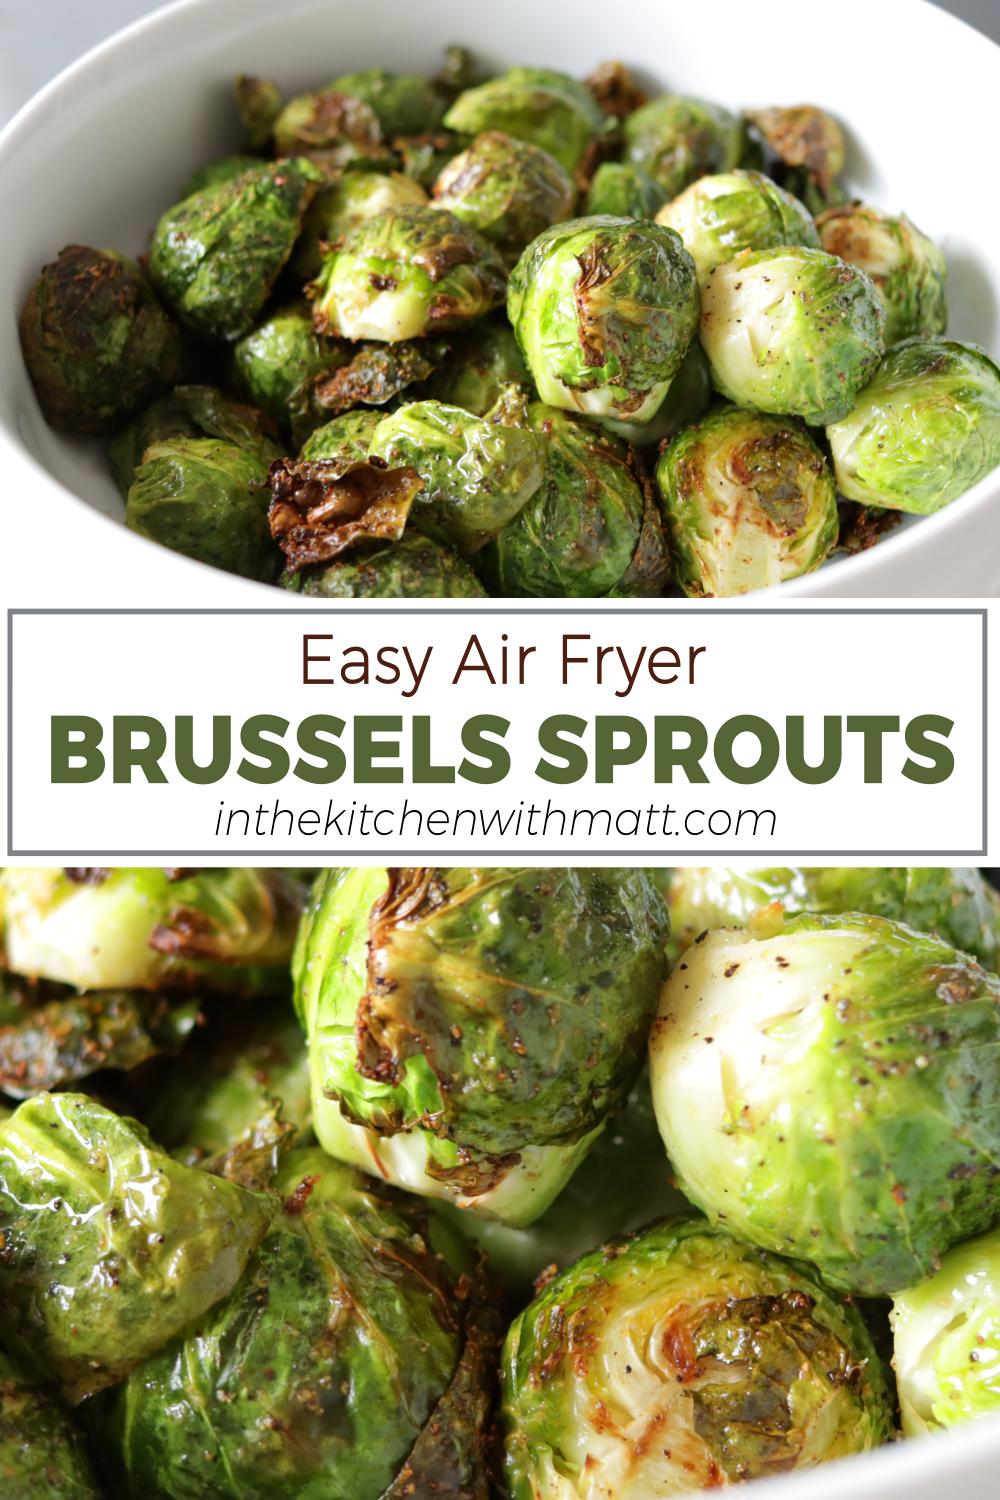 Air Fryer Brussels Sprouts Pin HI Res.jpg